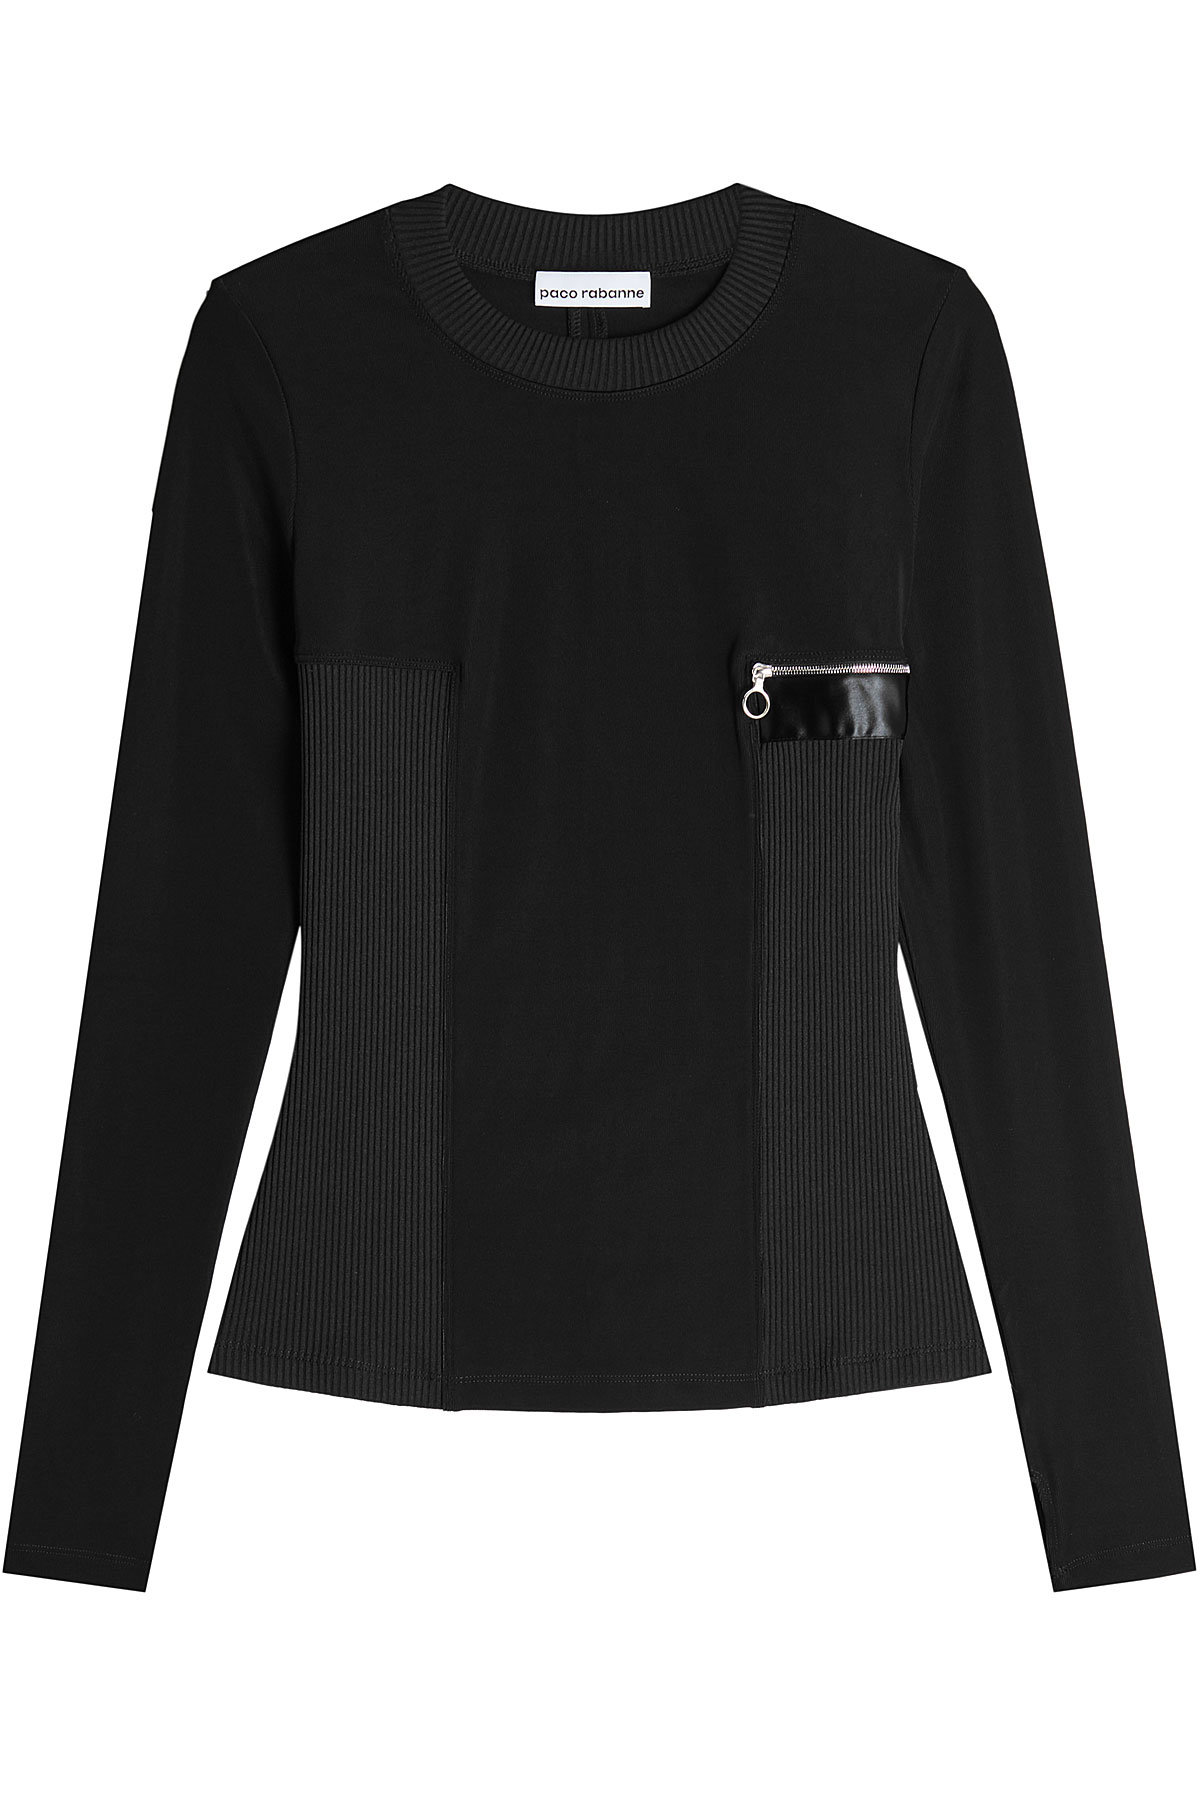 Paco Rabanne - Knit Pullover with Zipped Pocket